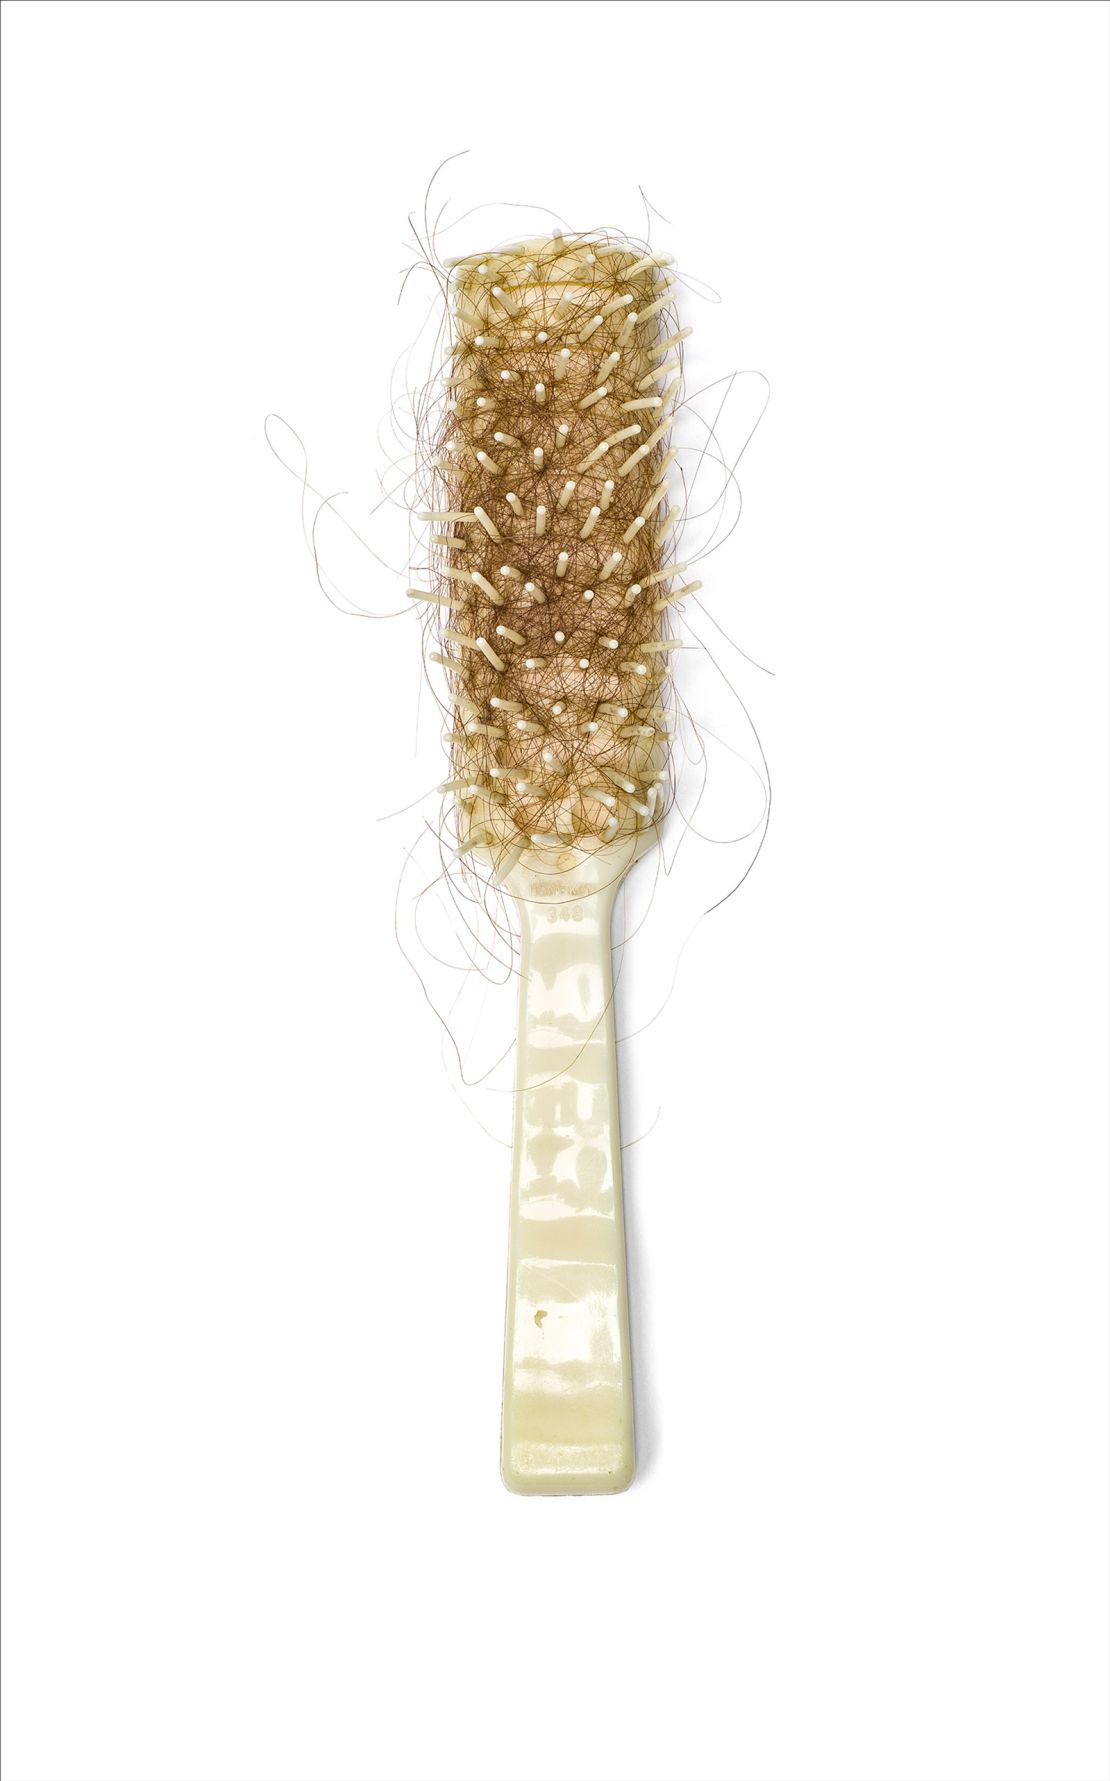 Photograph of Alan's Hairbrush from the series Saved: Objects of the Dead